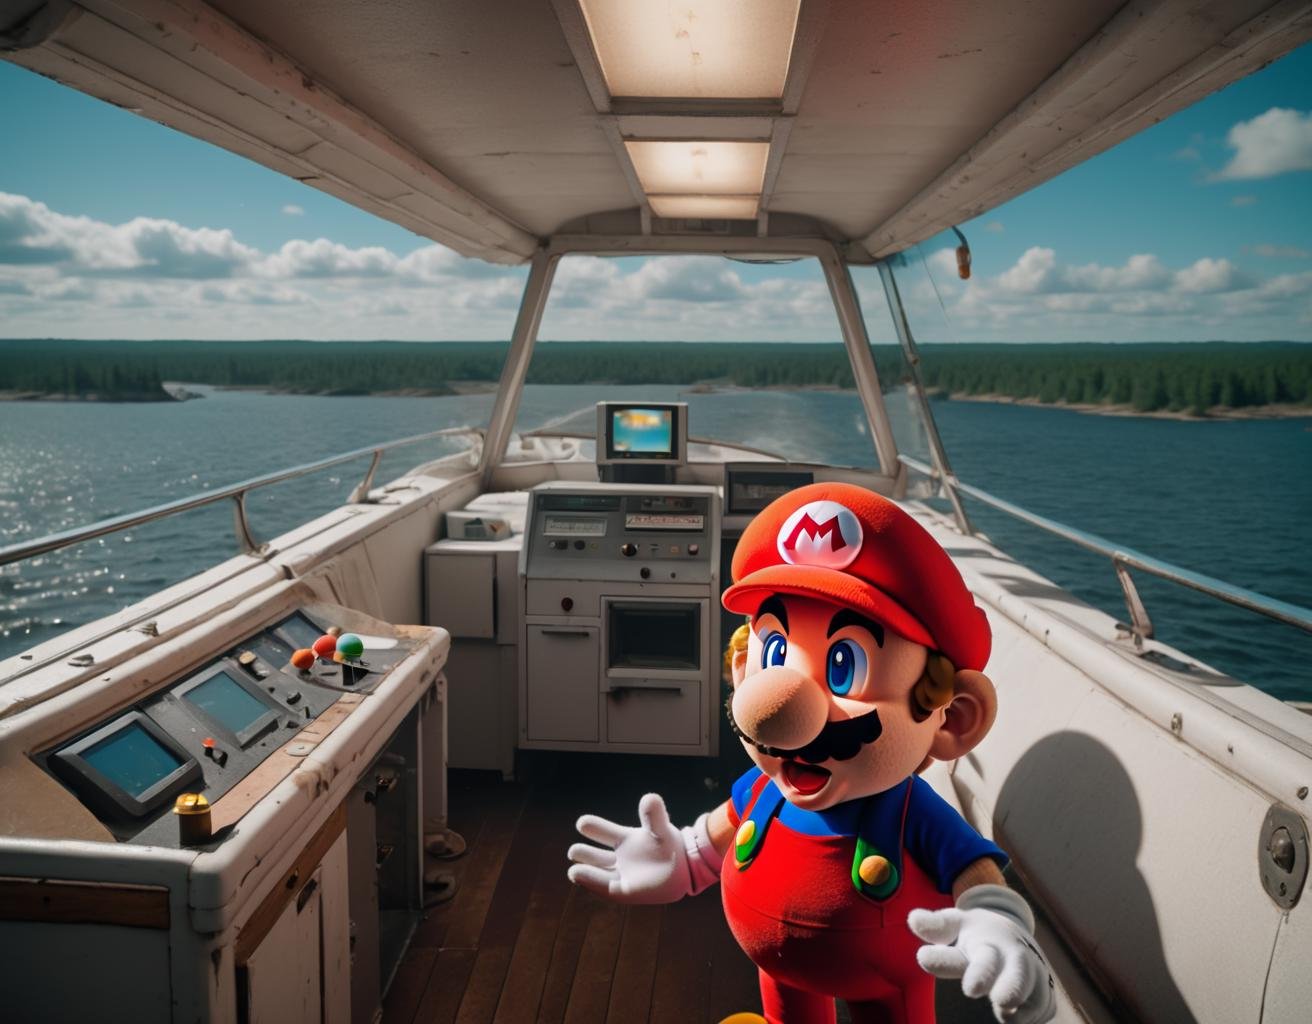 <lora:SMB Artstyle - V1 - Trigger is SMB Artstyle:1> smb artstyle exploring, looking for ghosts, on a haunted yacht, Navigation bridge